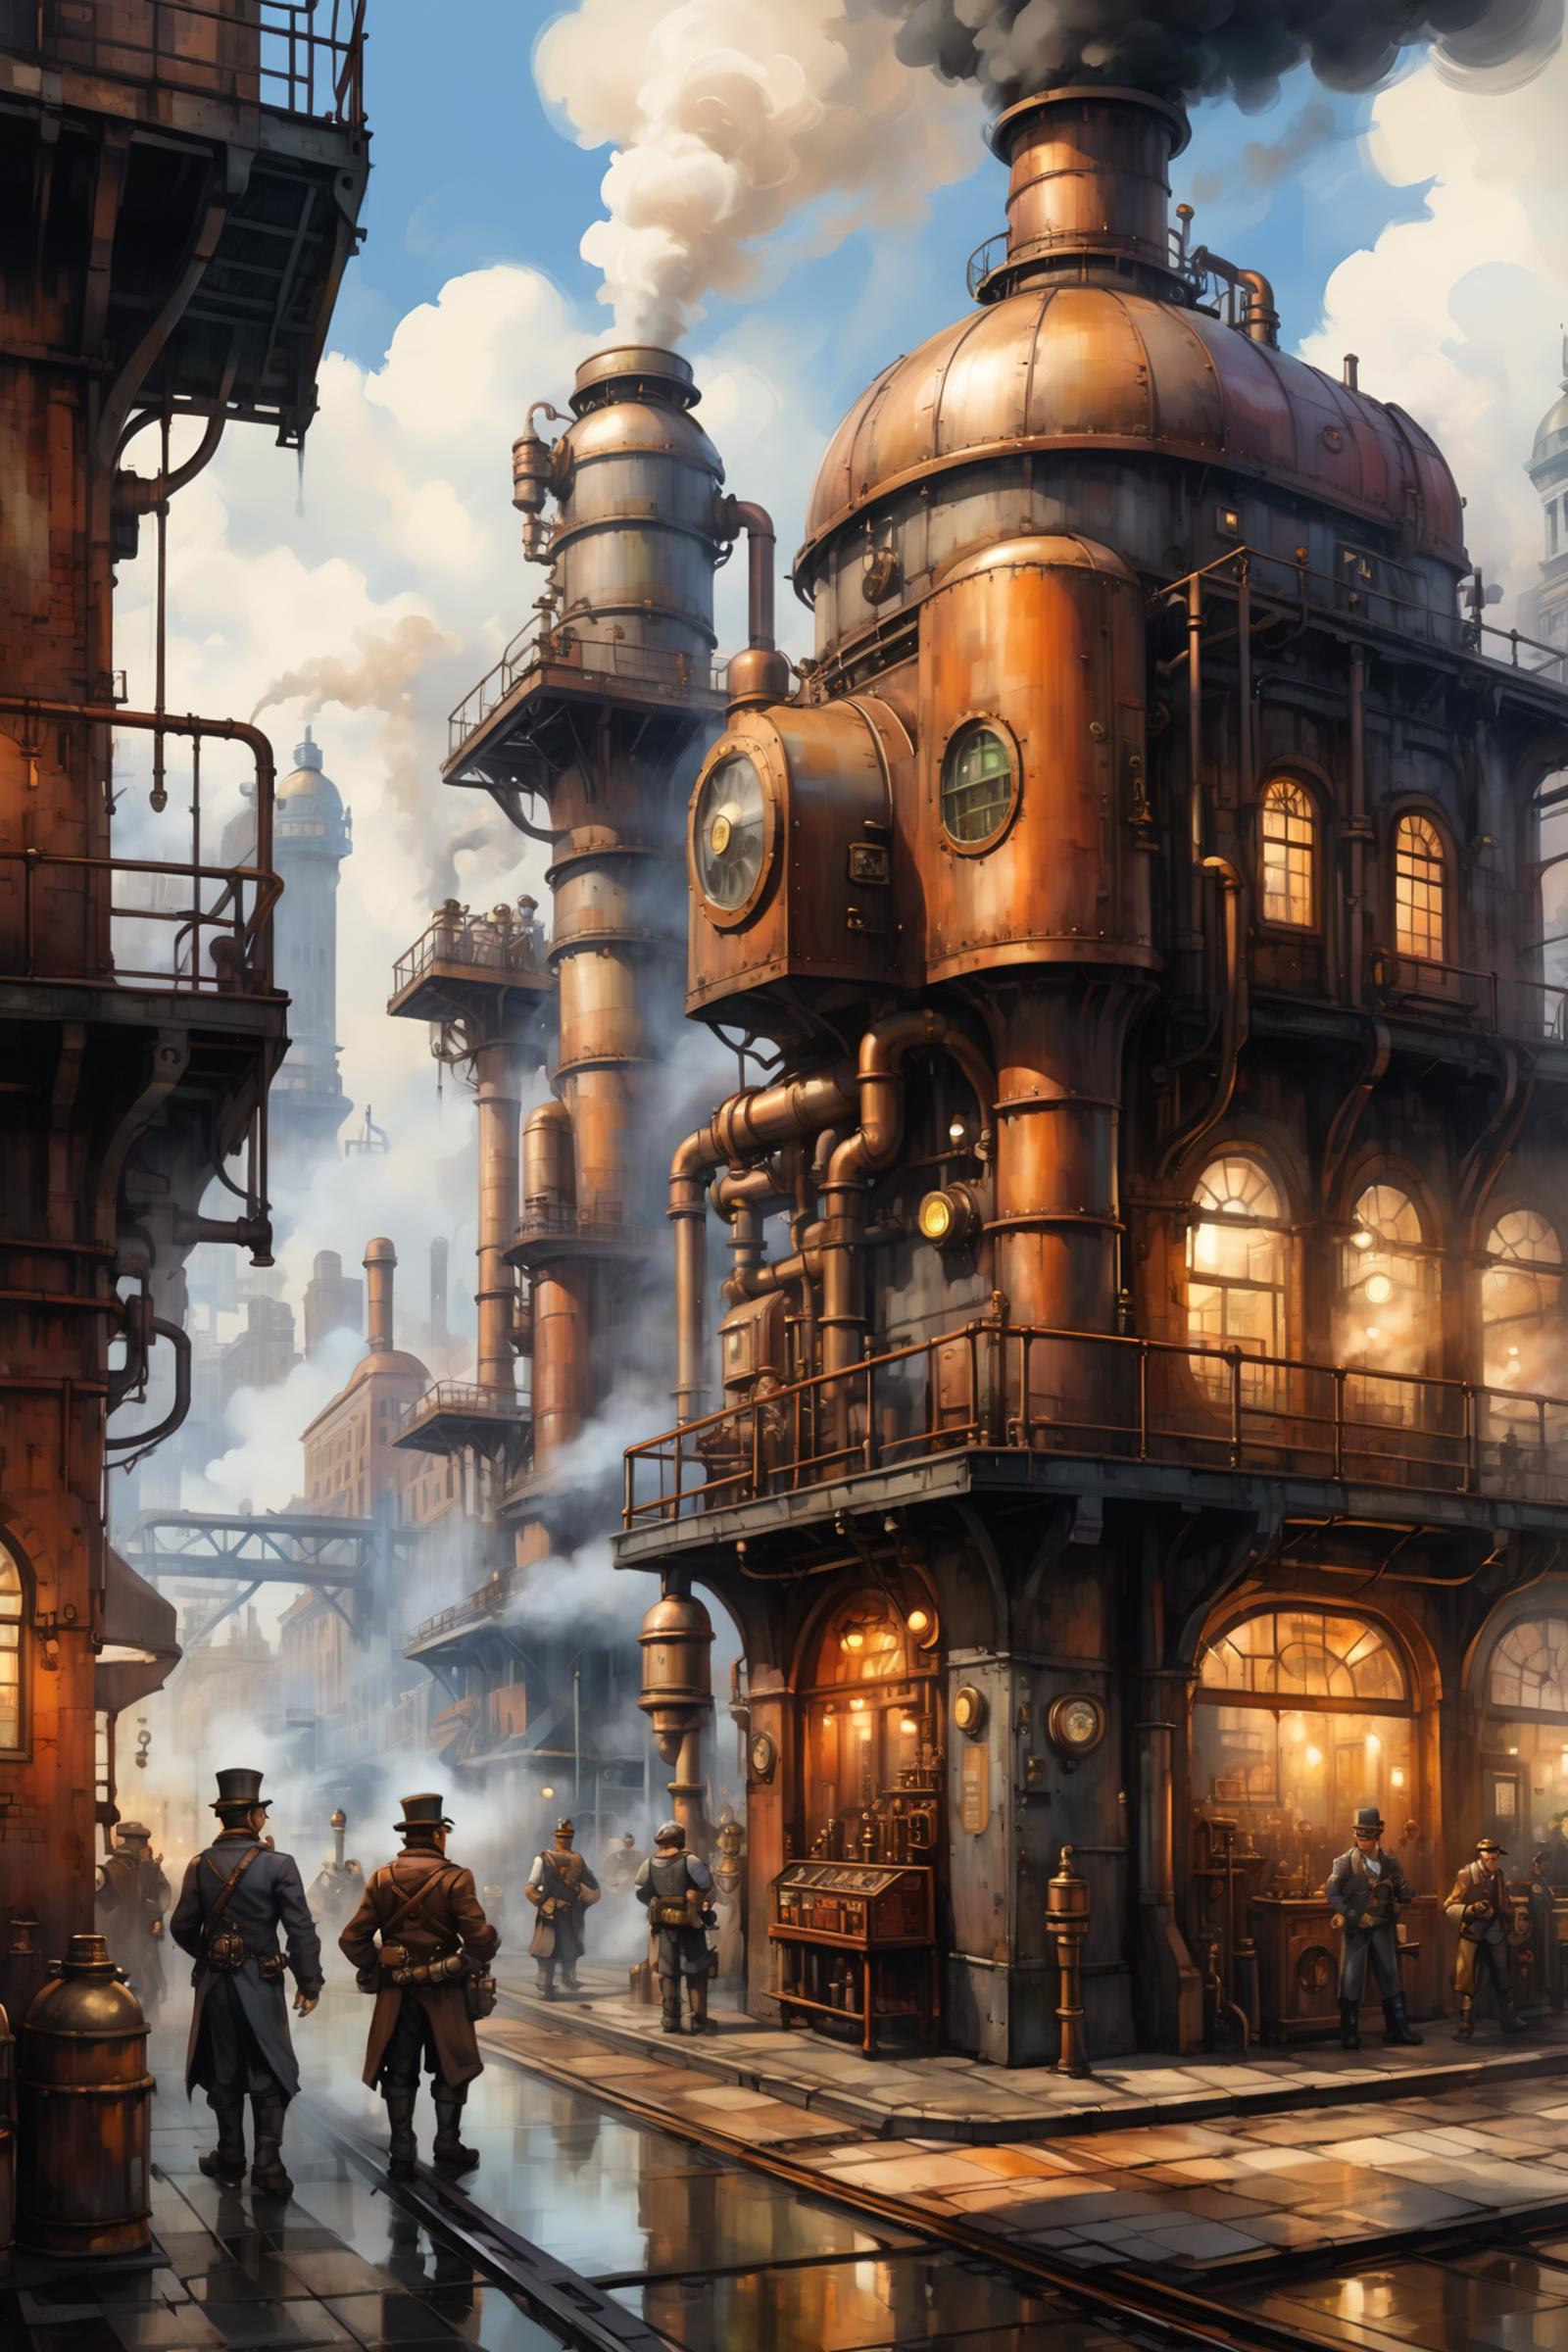 Steampunk Cityscape with Numerous Gears, Clocks and Towers